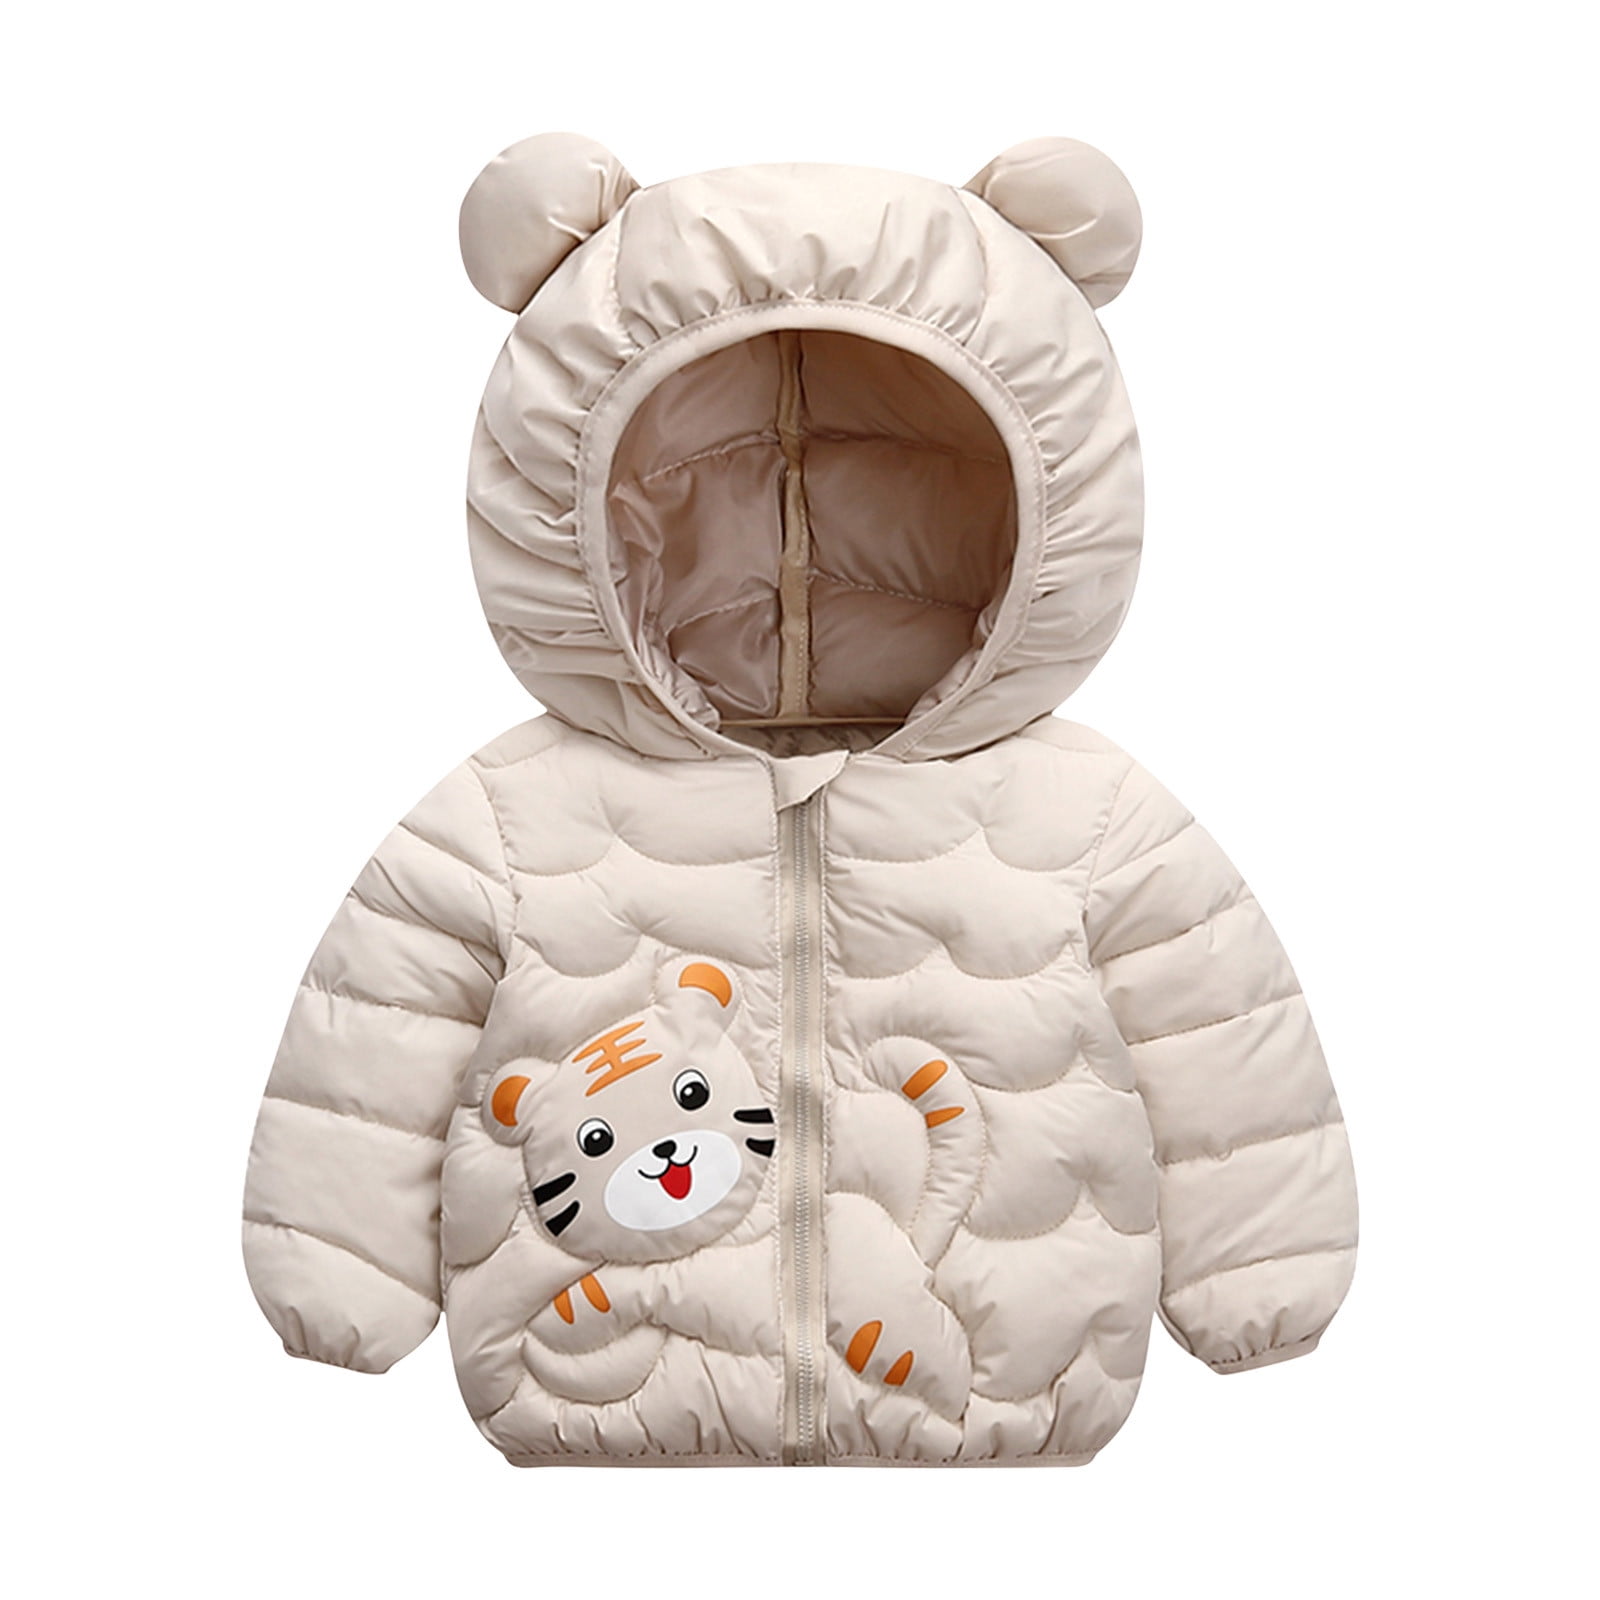 skpabo Baby Girls Boys' Winter Fleece Jackets with Hooded Toddler Cotton  Dress Warm Lined Coat Outer Clothing 